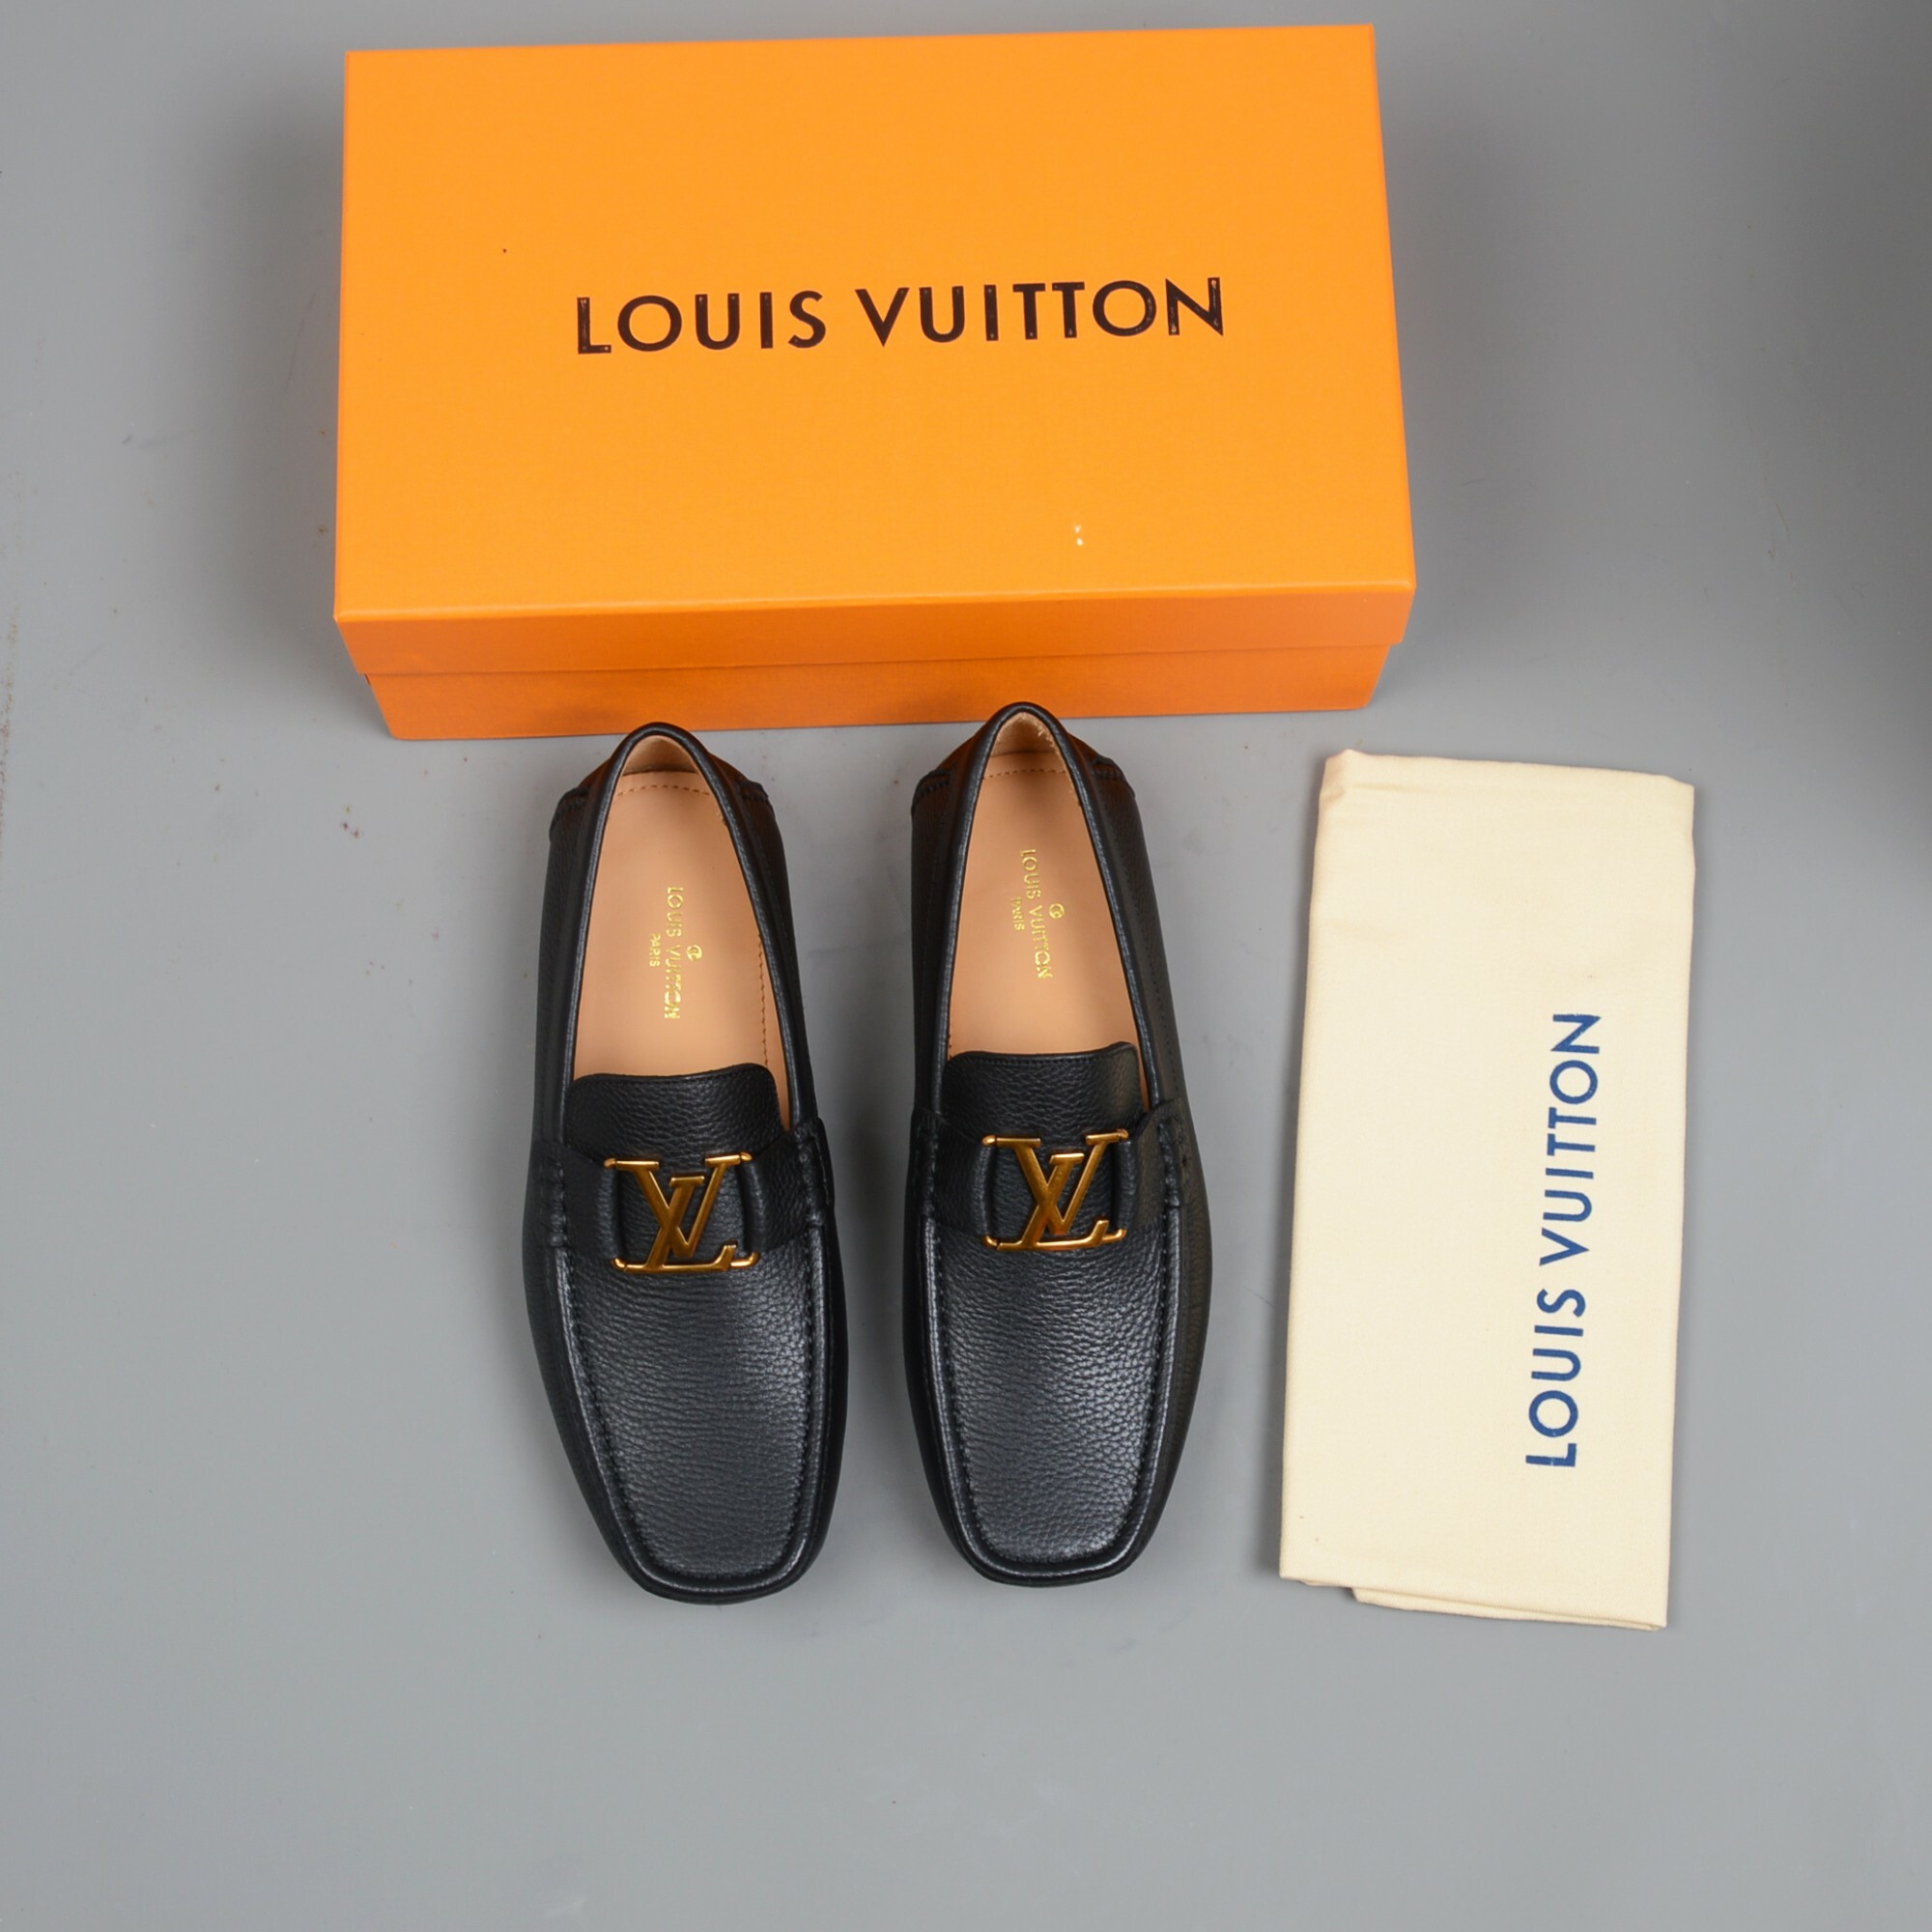 Louis Vuitton Dark Brown Leather Monte Carlo Loafers Size 41 Louis